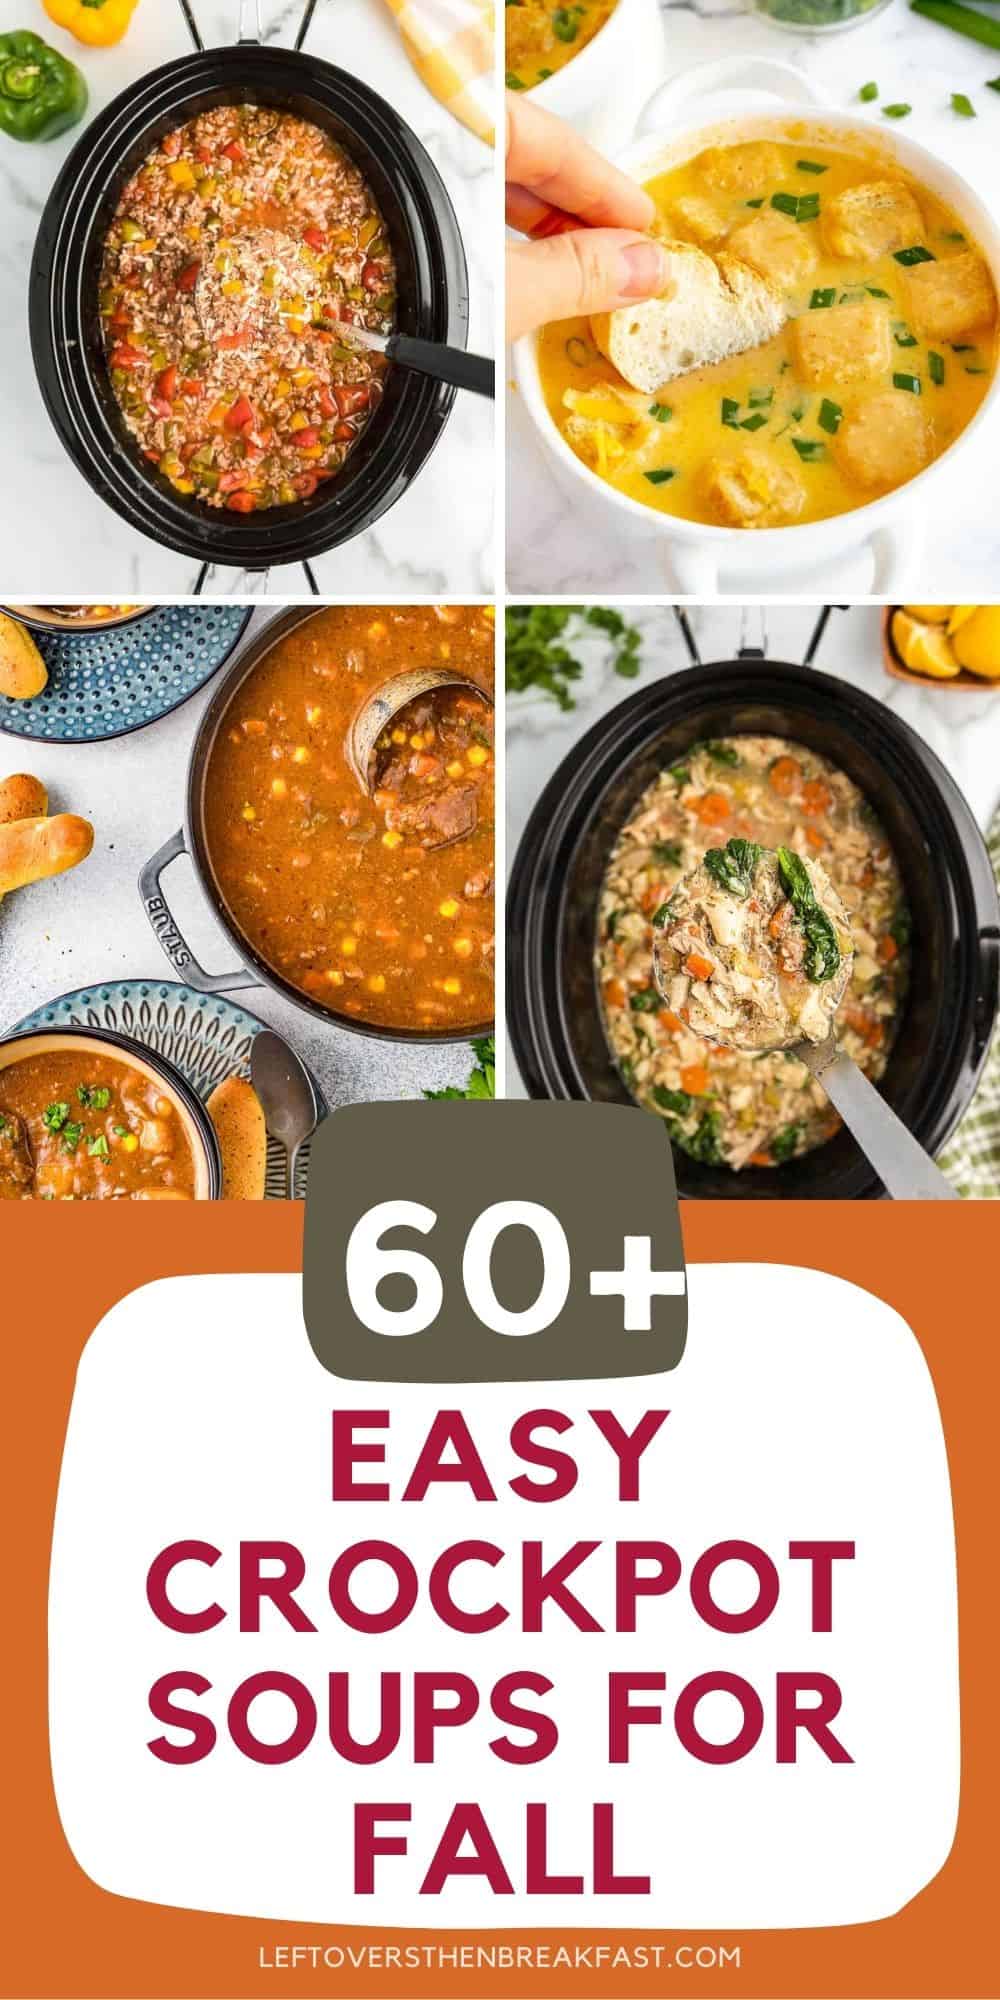 collage of 4 pots of soup with text "60+ easy crockpot soups for fall"